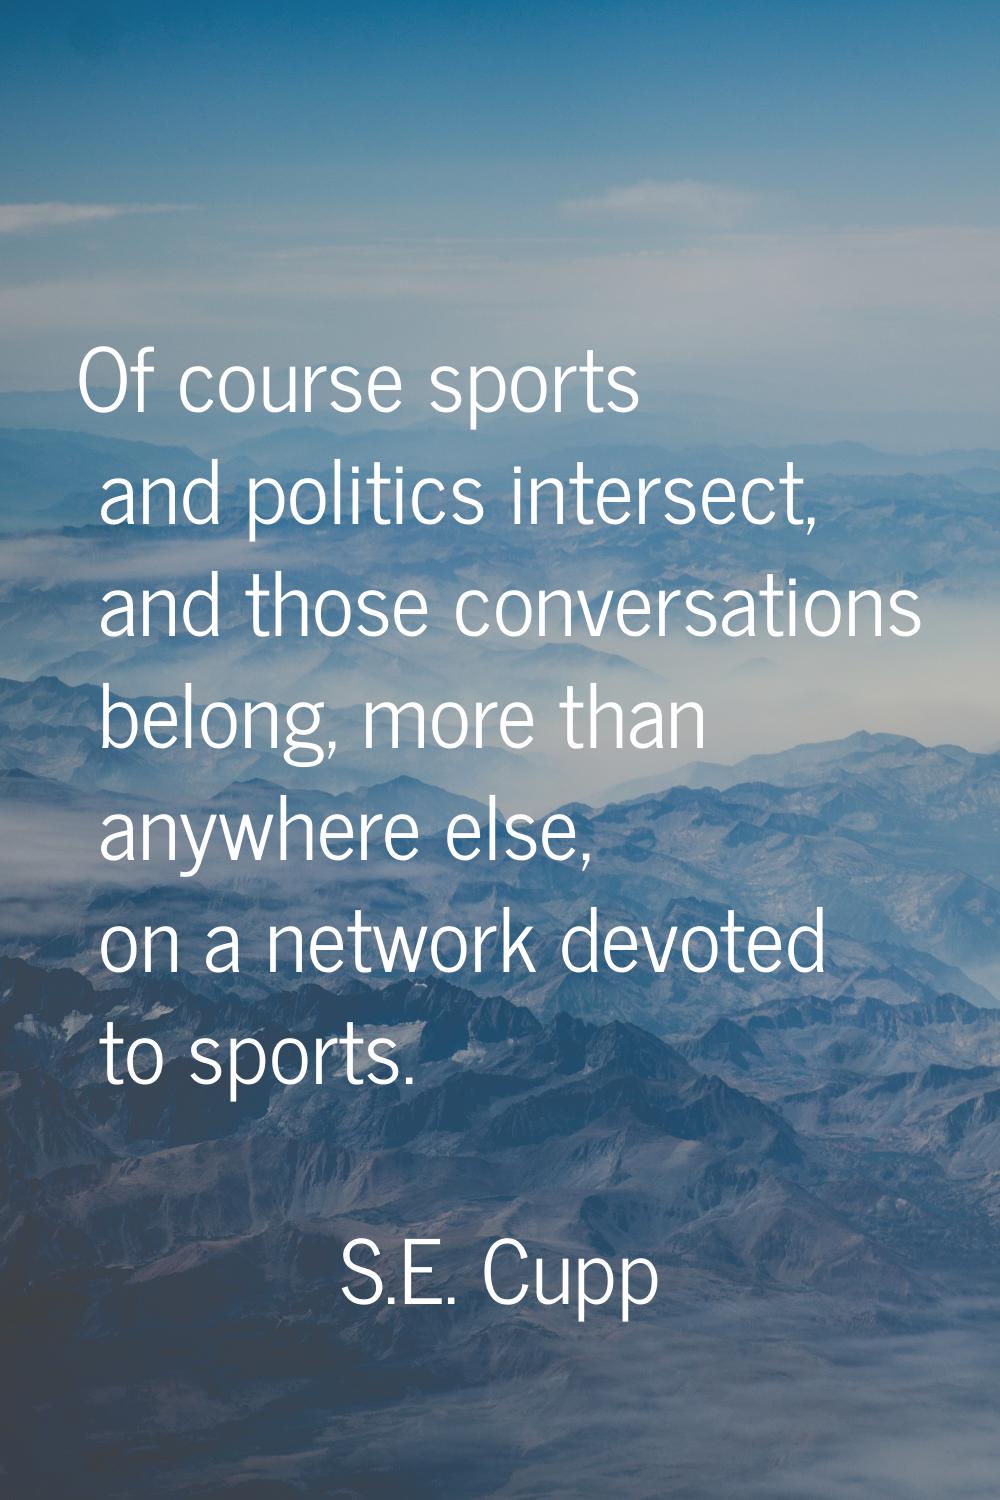 Of course sports and politics intersect, and those conversations belong, more than anywhere else, o